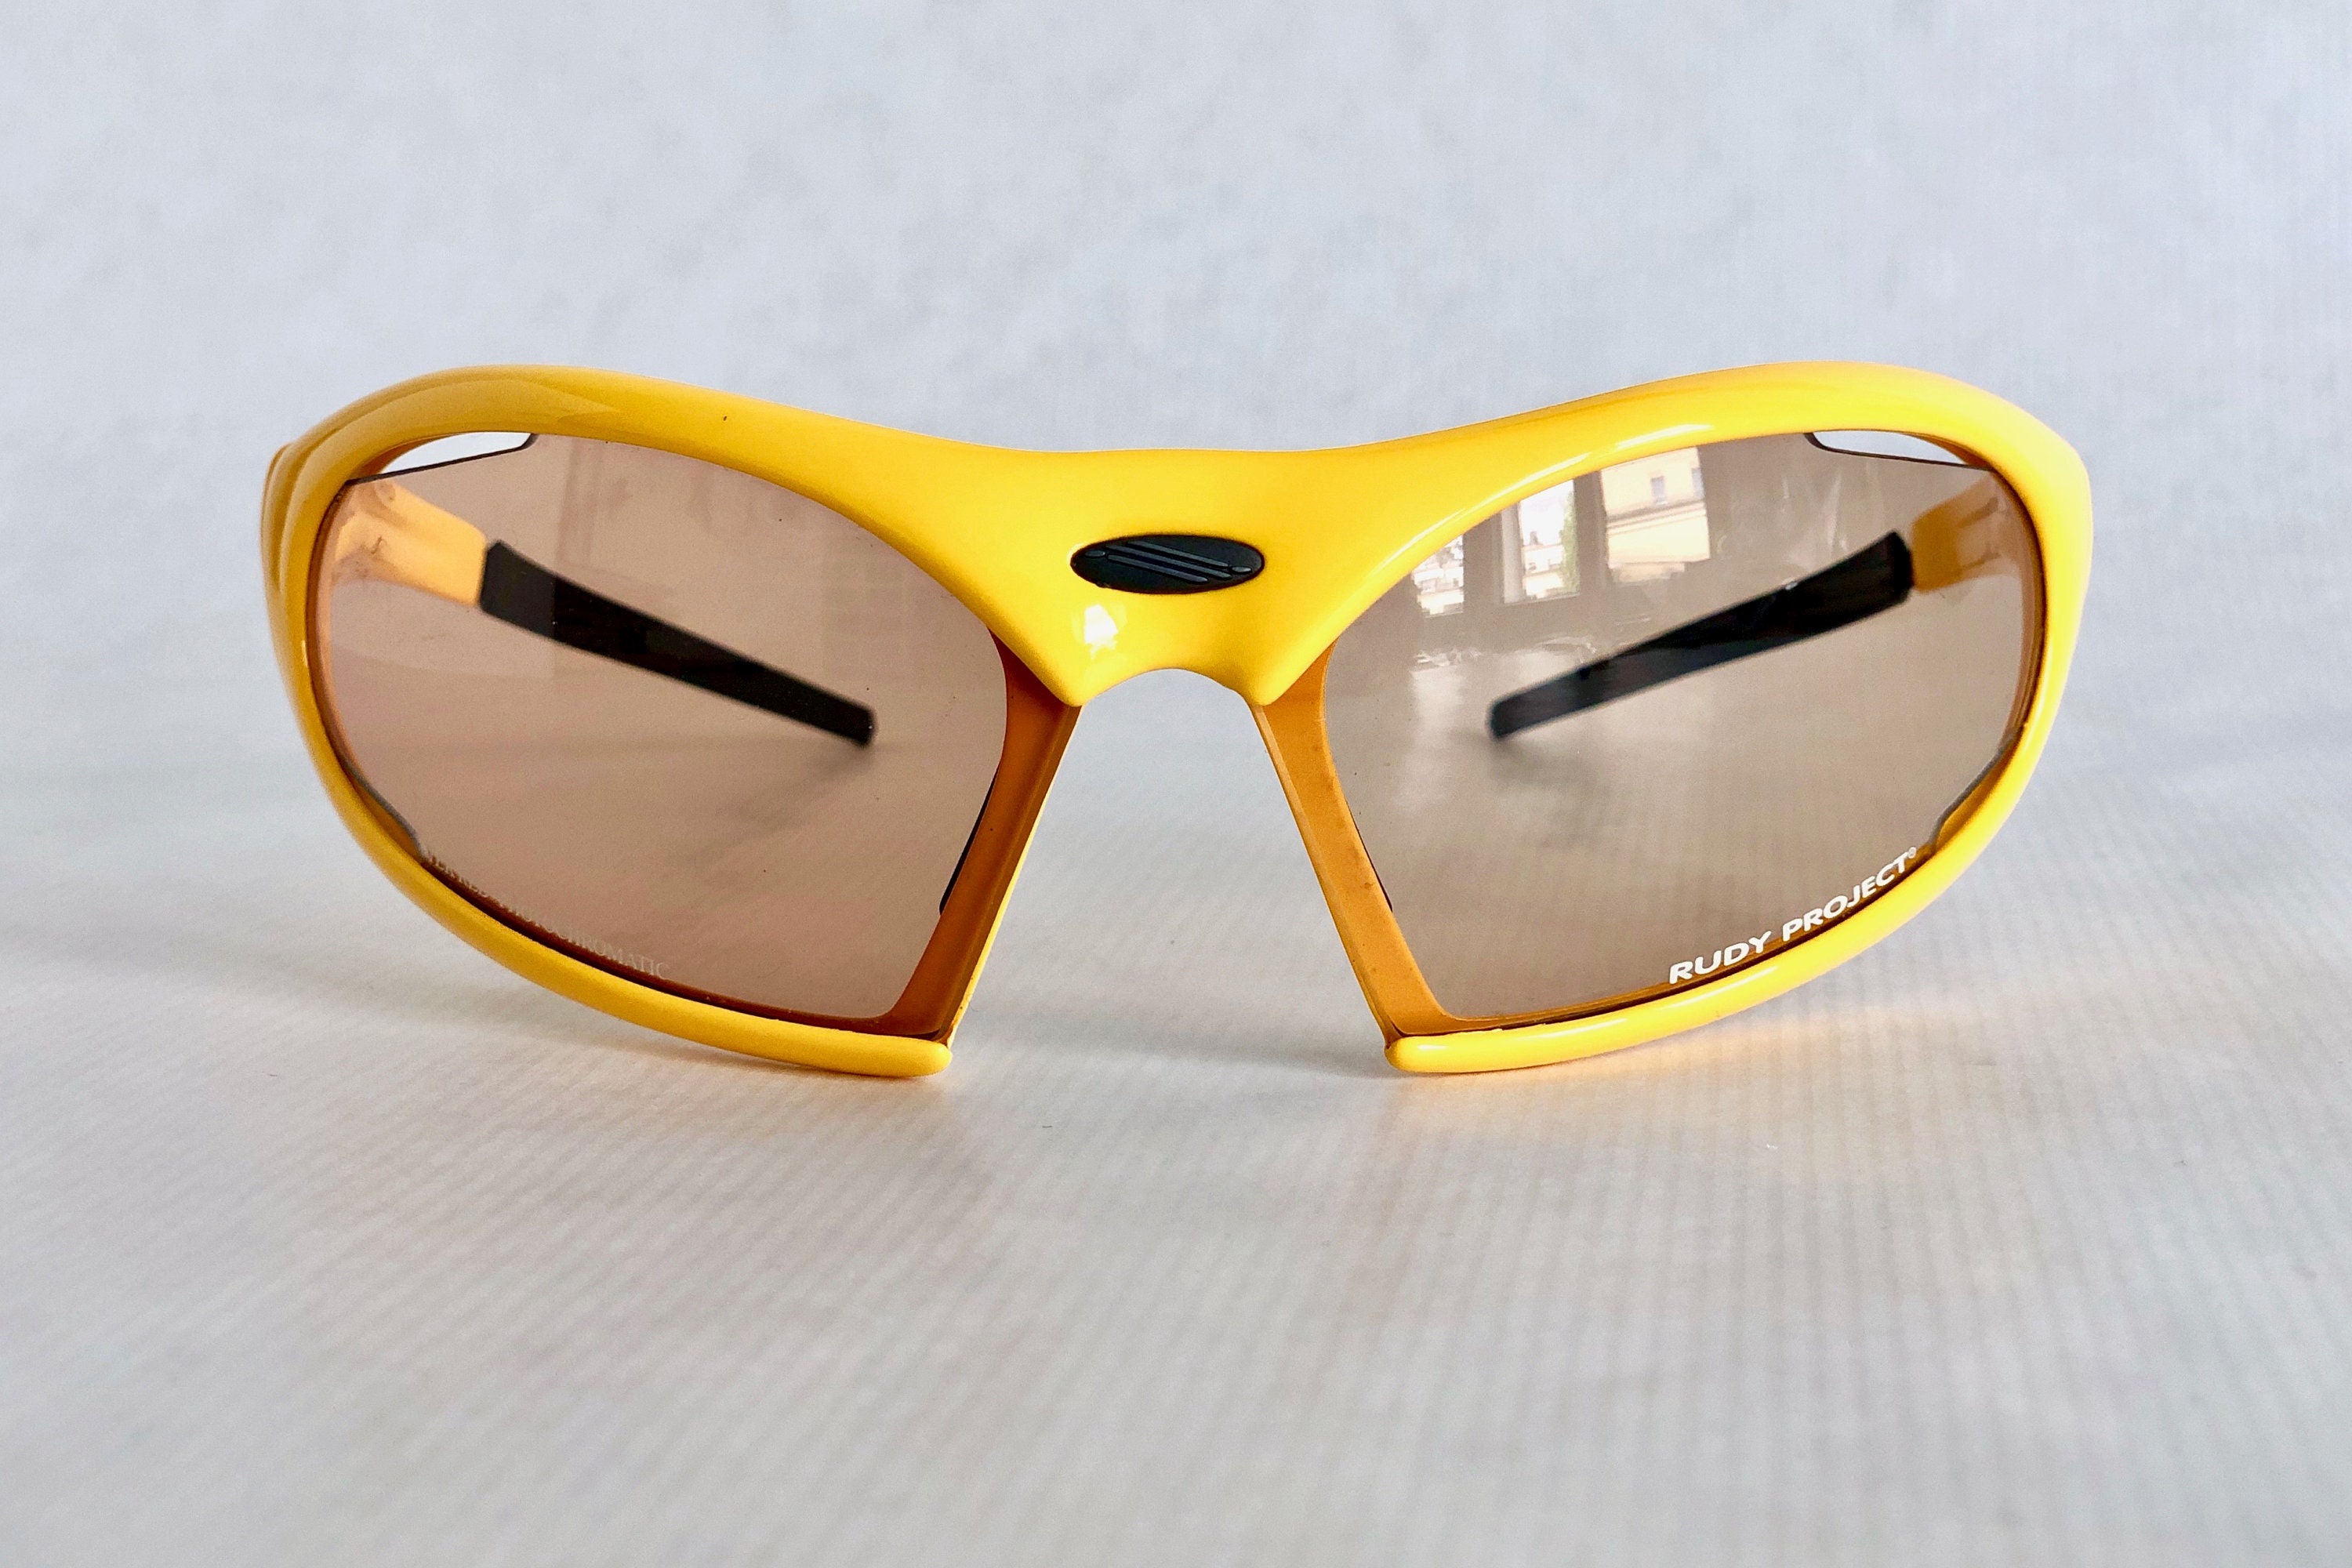 Rudy Project Tayo Tek Photochromatic Vintage Sunglasses – New Old Stock Made in Italy